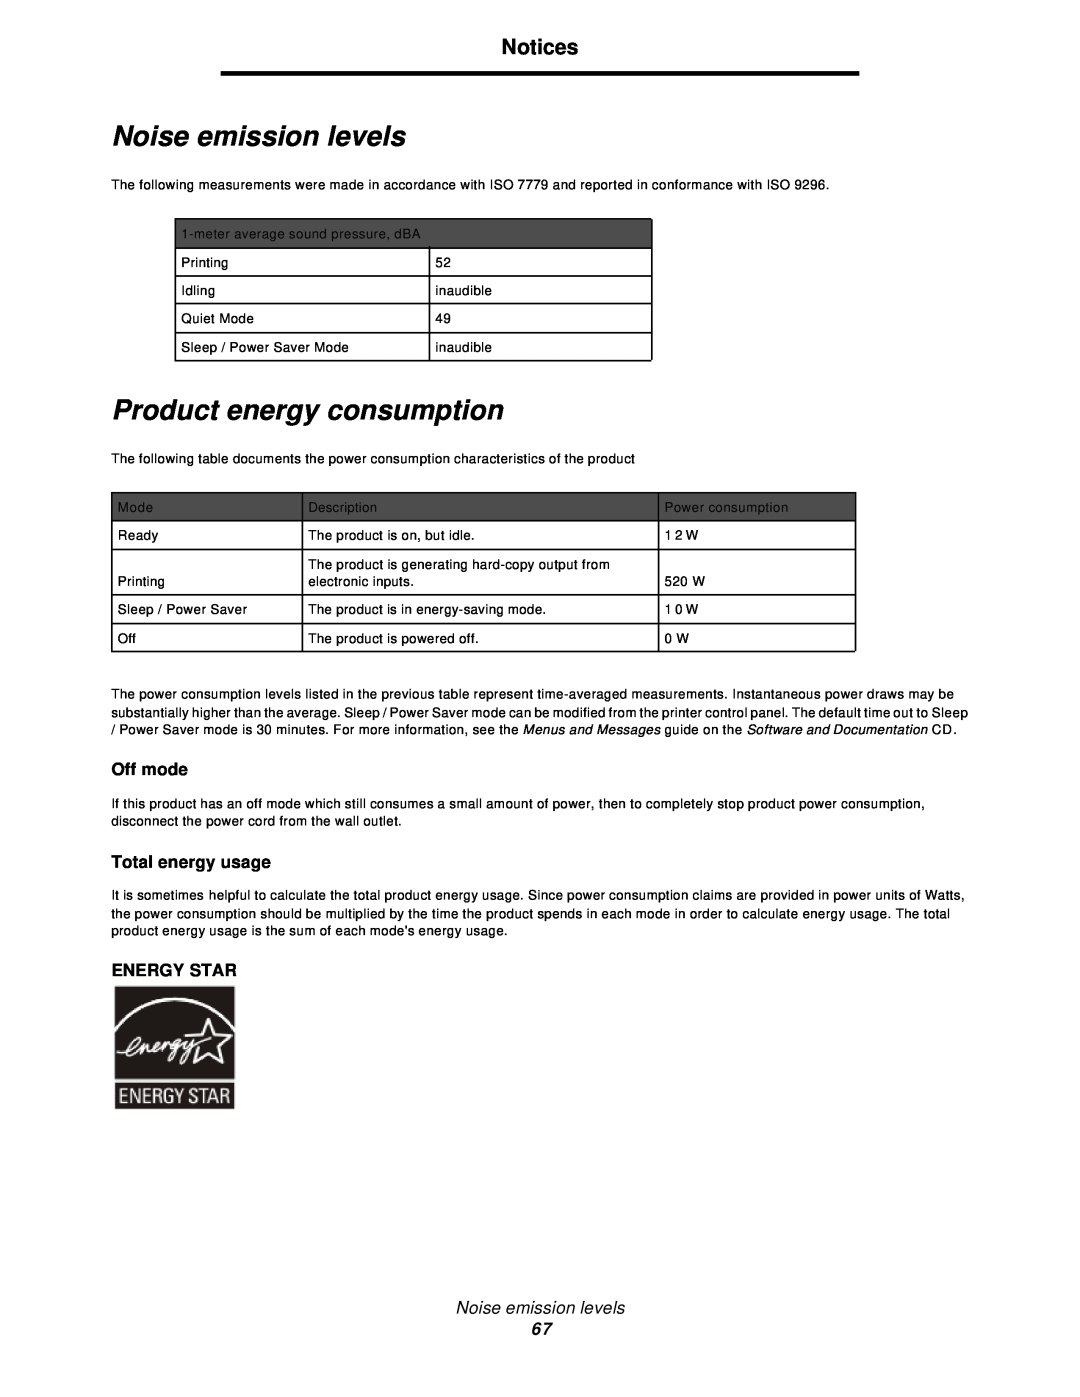 Lexmark 350d manual Noise emission levels, Product energy consumption, Off mode, Total energy usage, Energy Star, Notices 